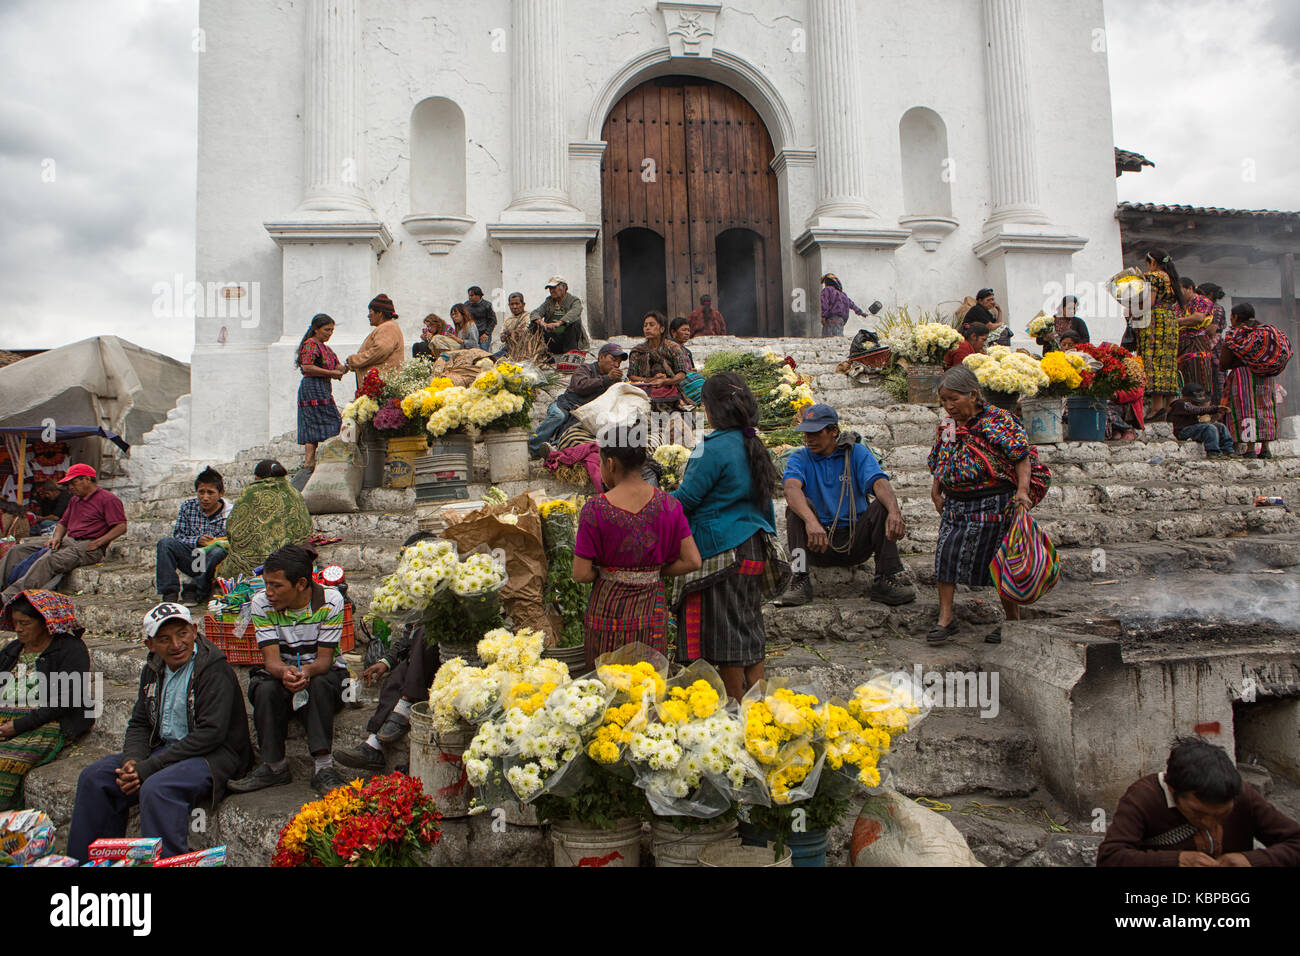 February 5, 2015 Chichicastenango, Guatemala: vendors selling cut flowers on the stairs of the church Stock Photo